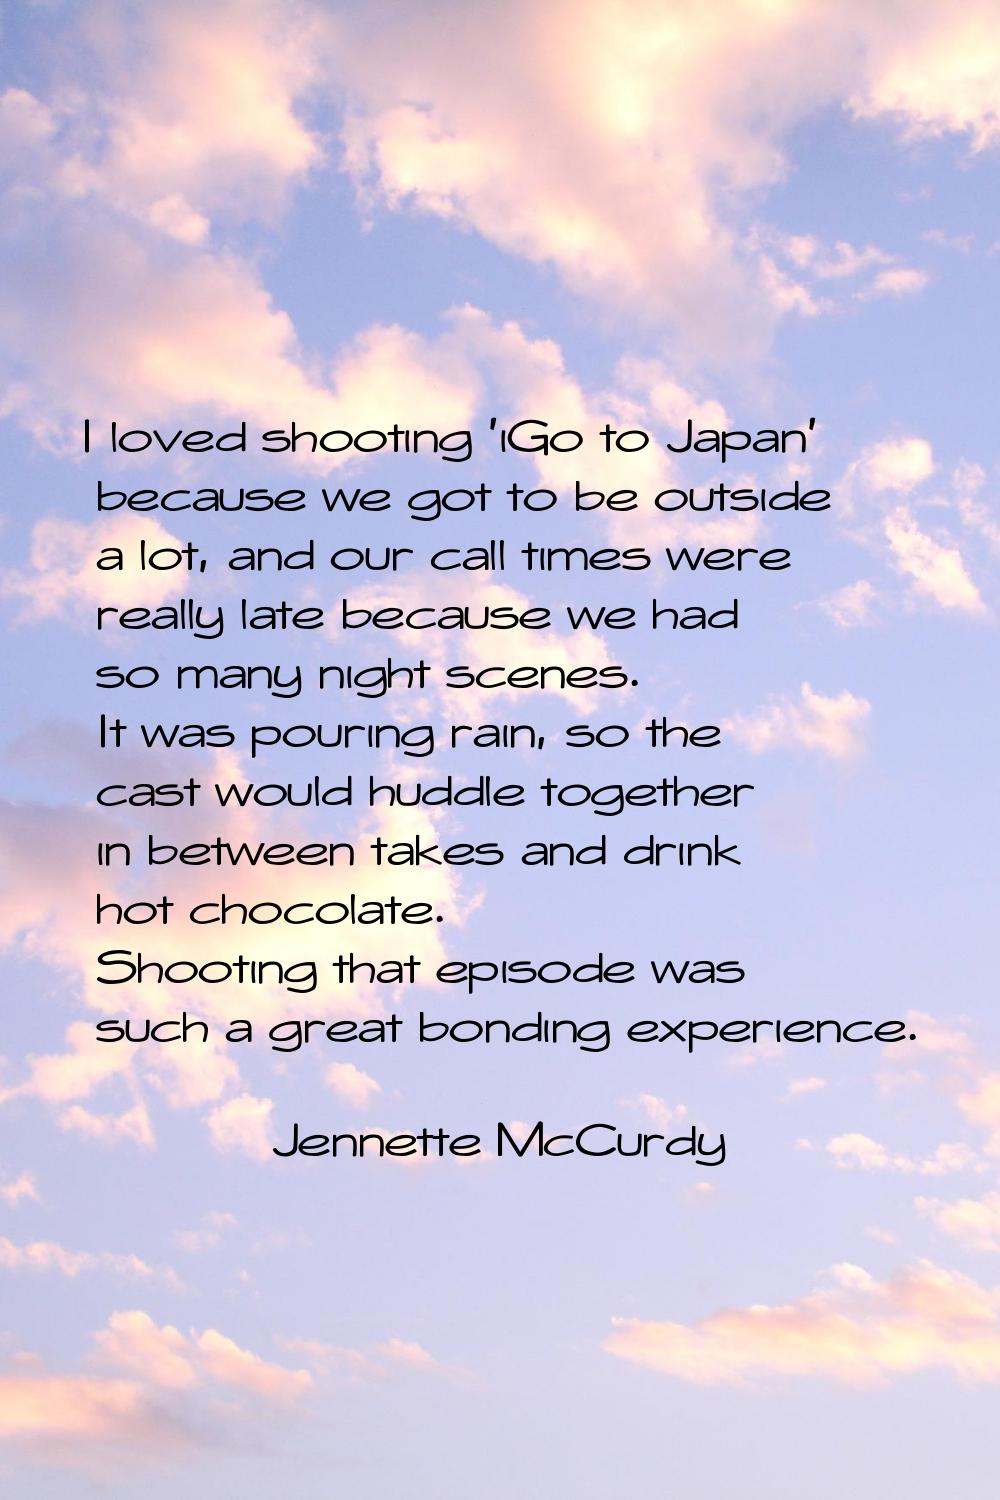 I loved shooting 'iGo to Japan' because we got to be outside a lot, and our call times were really 